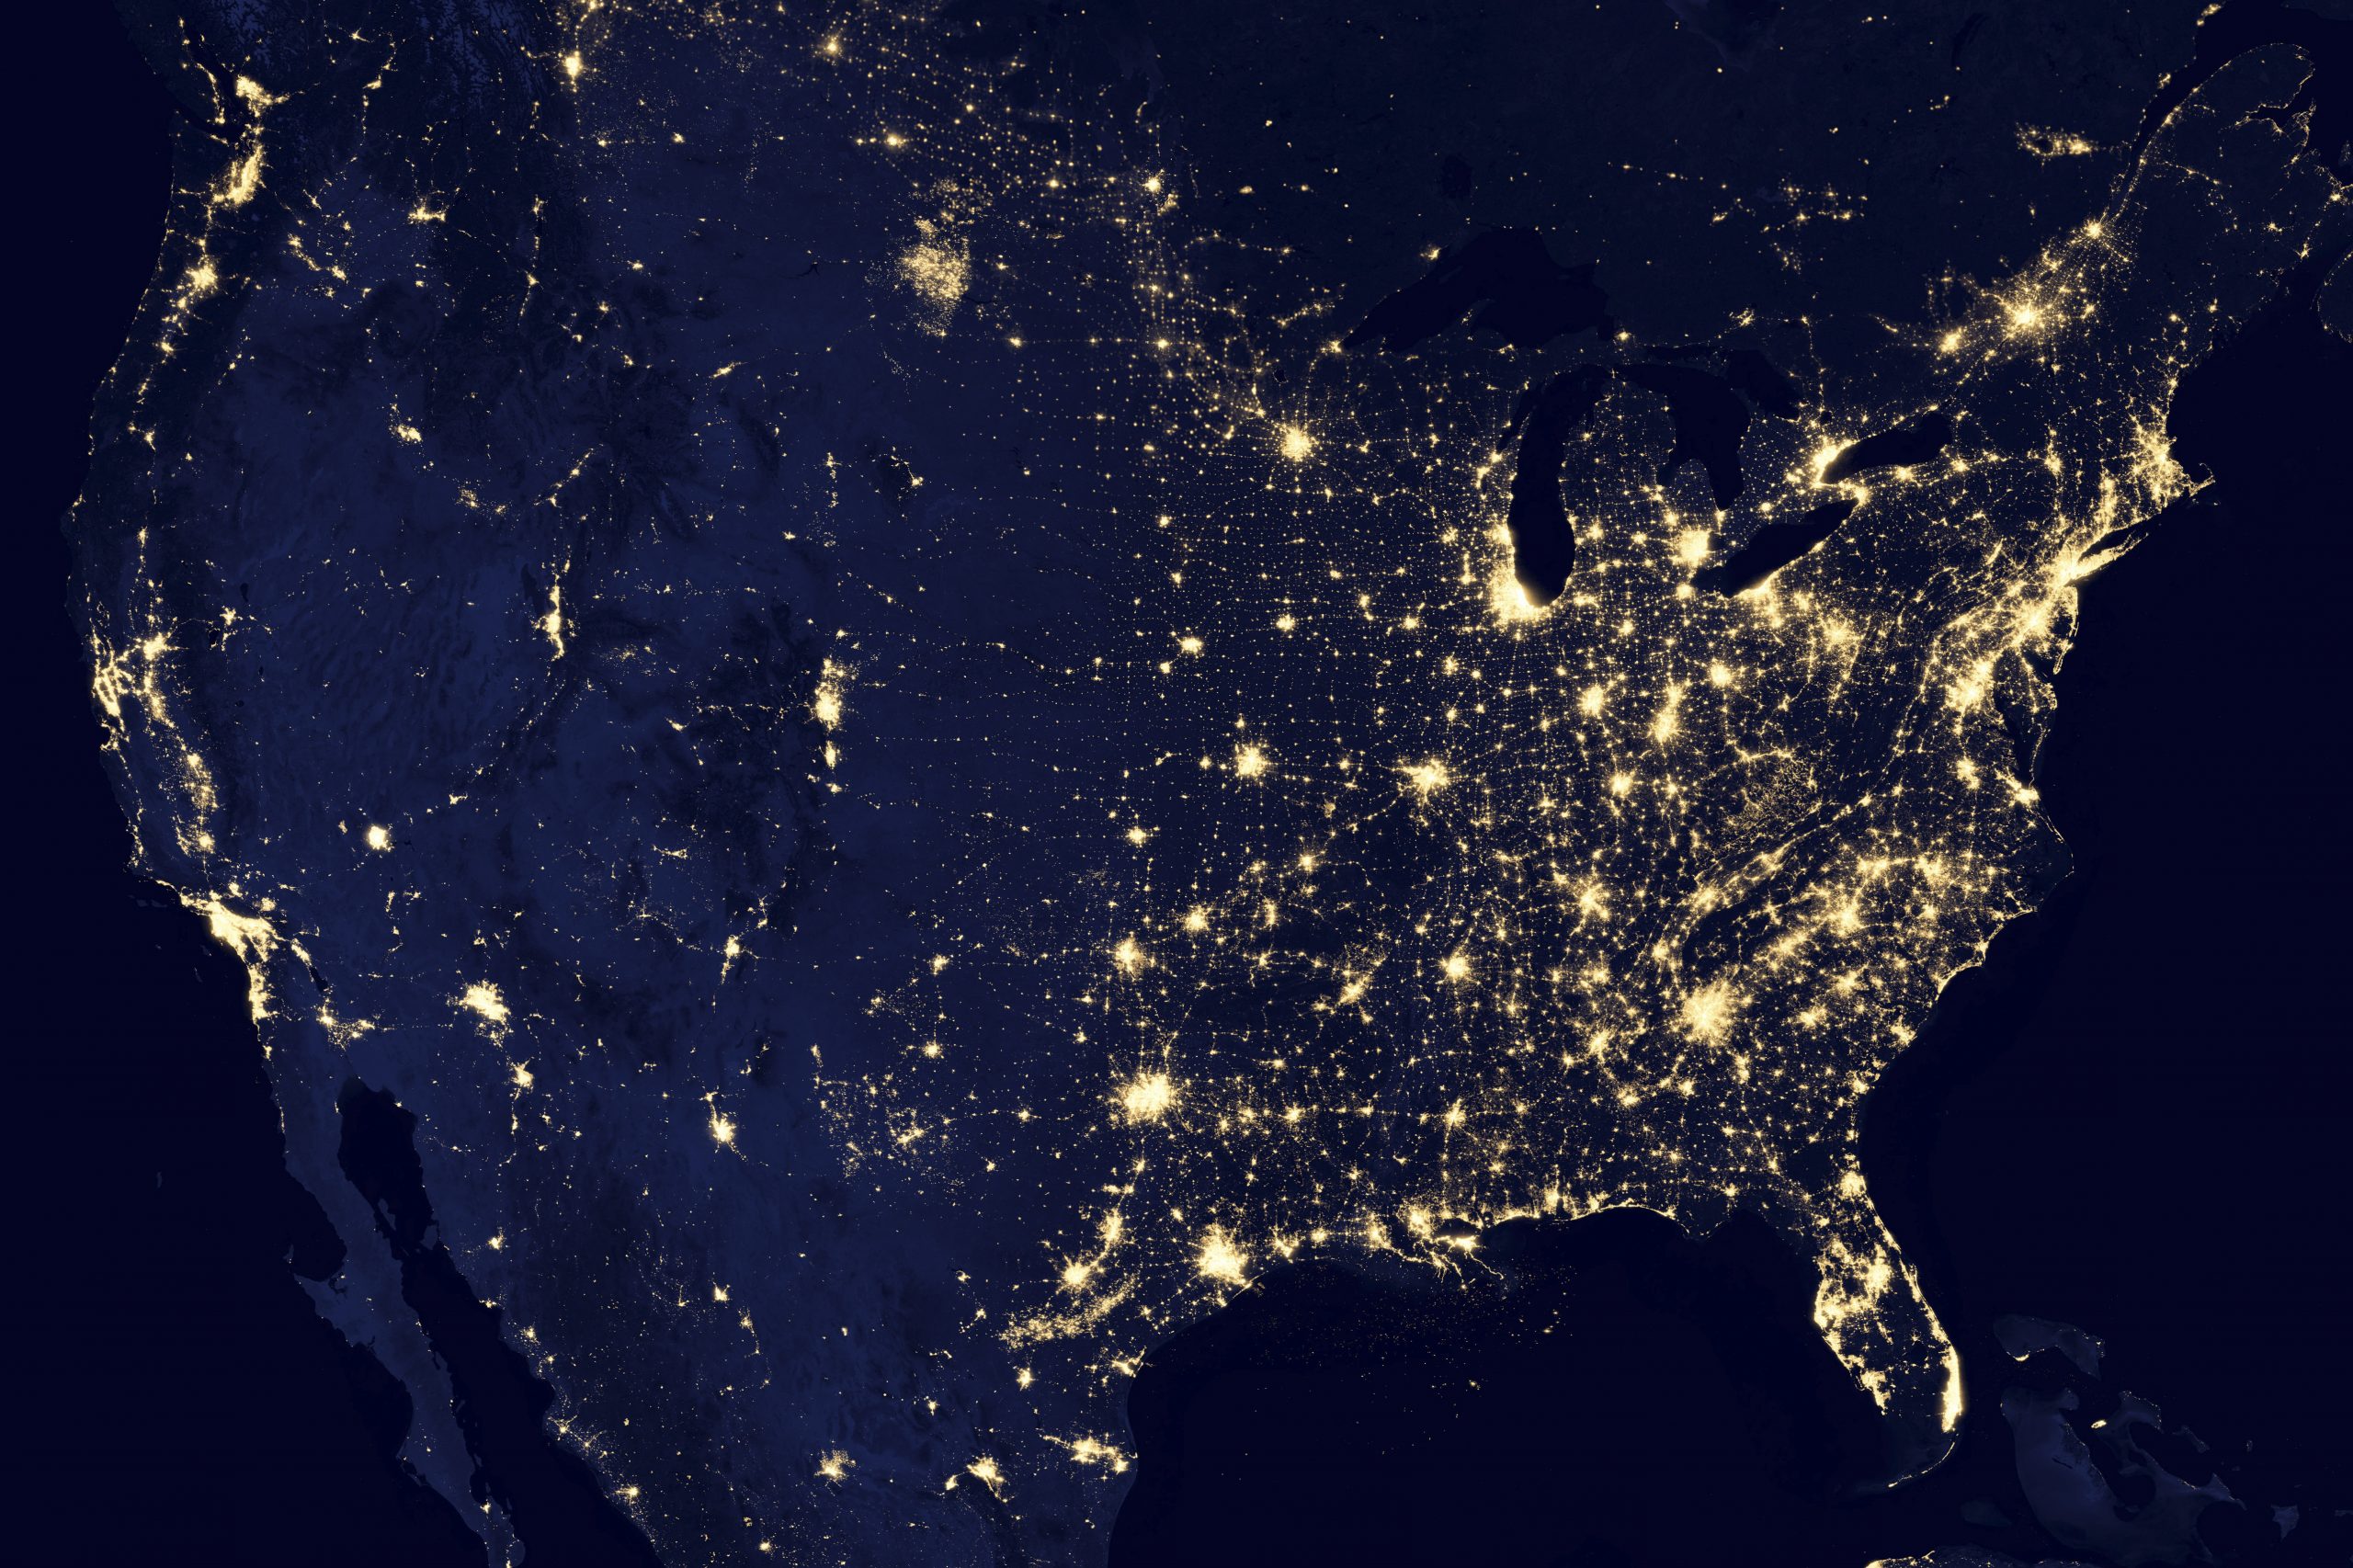 Satellite view of City lights of the United States at night.